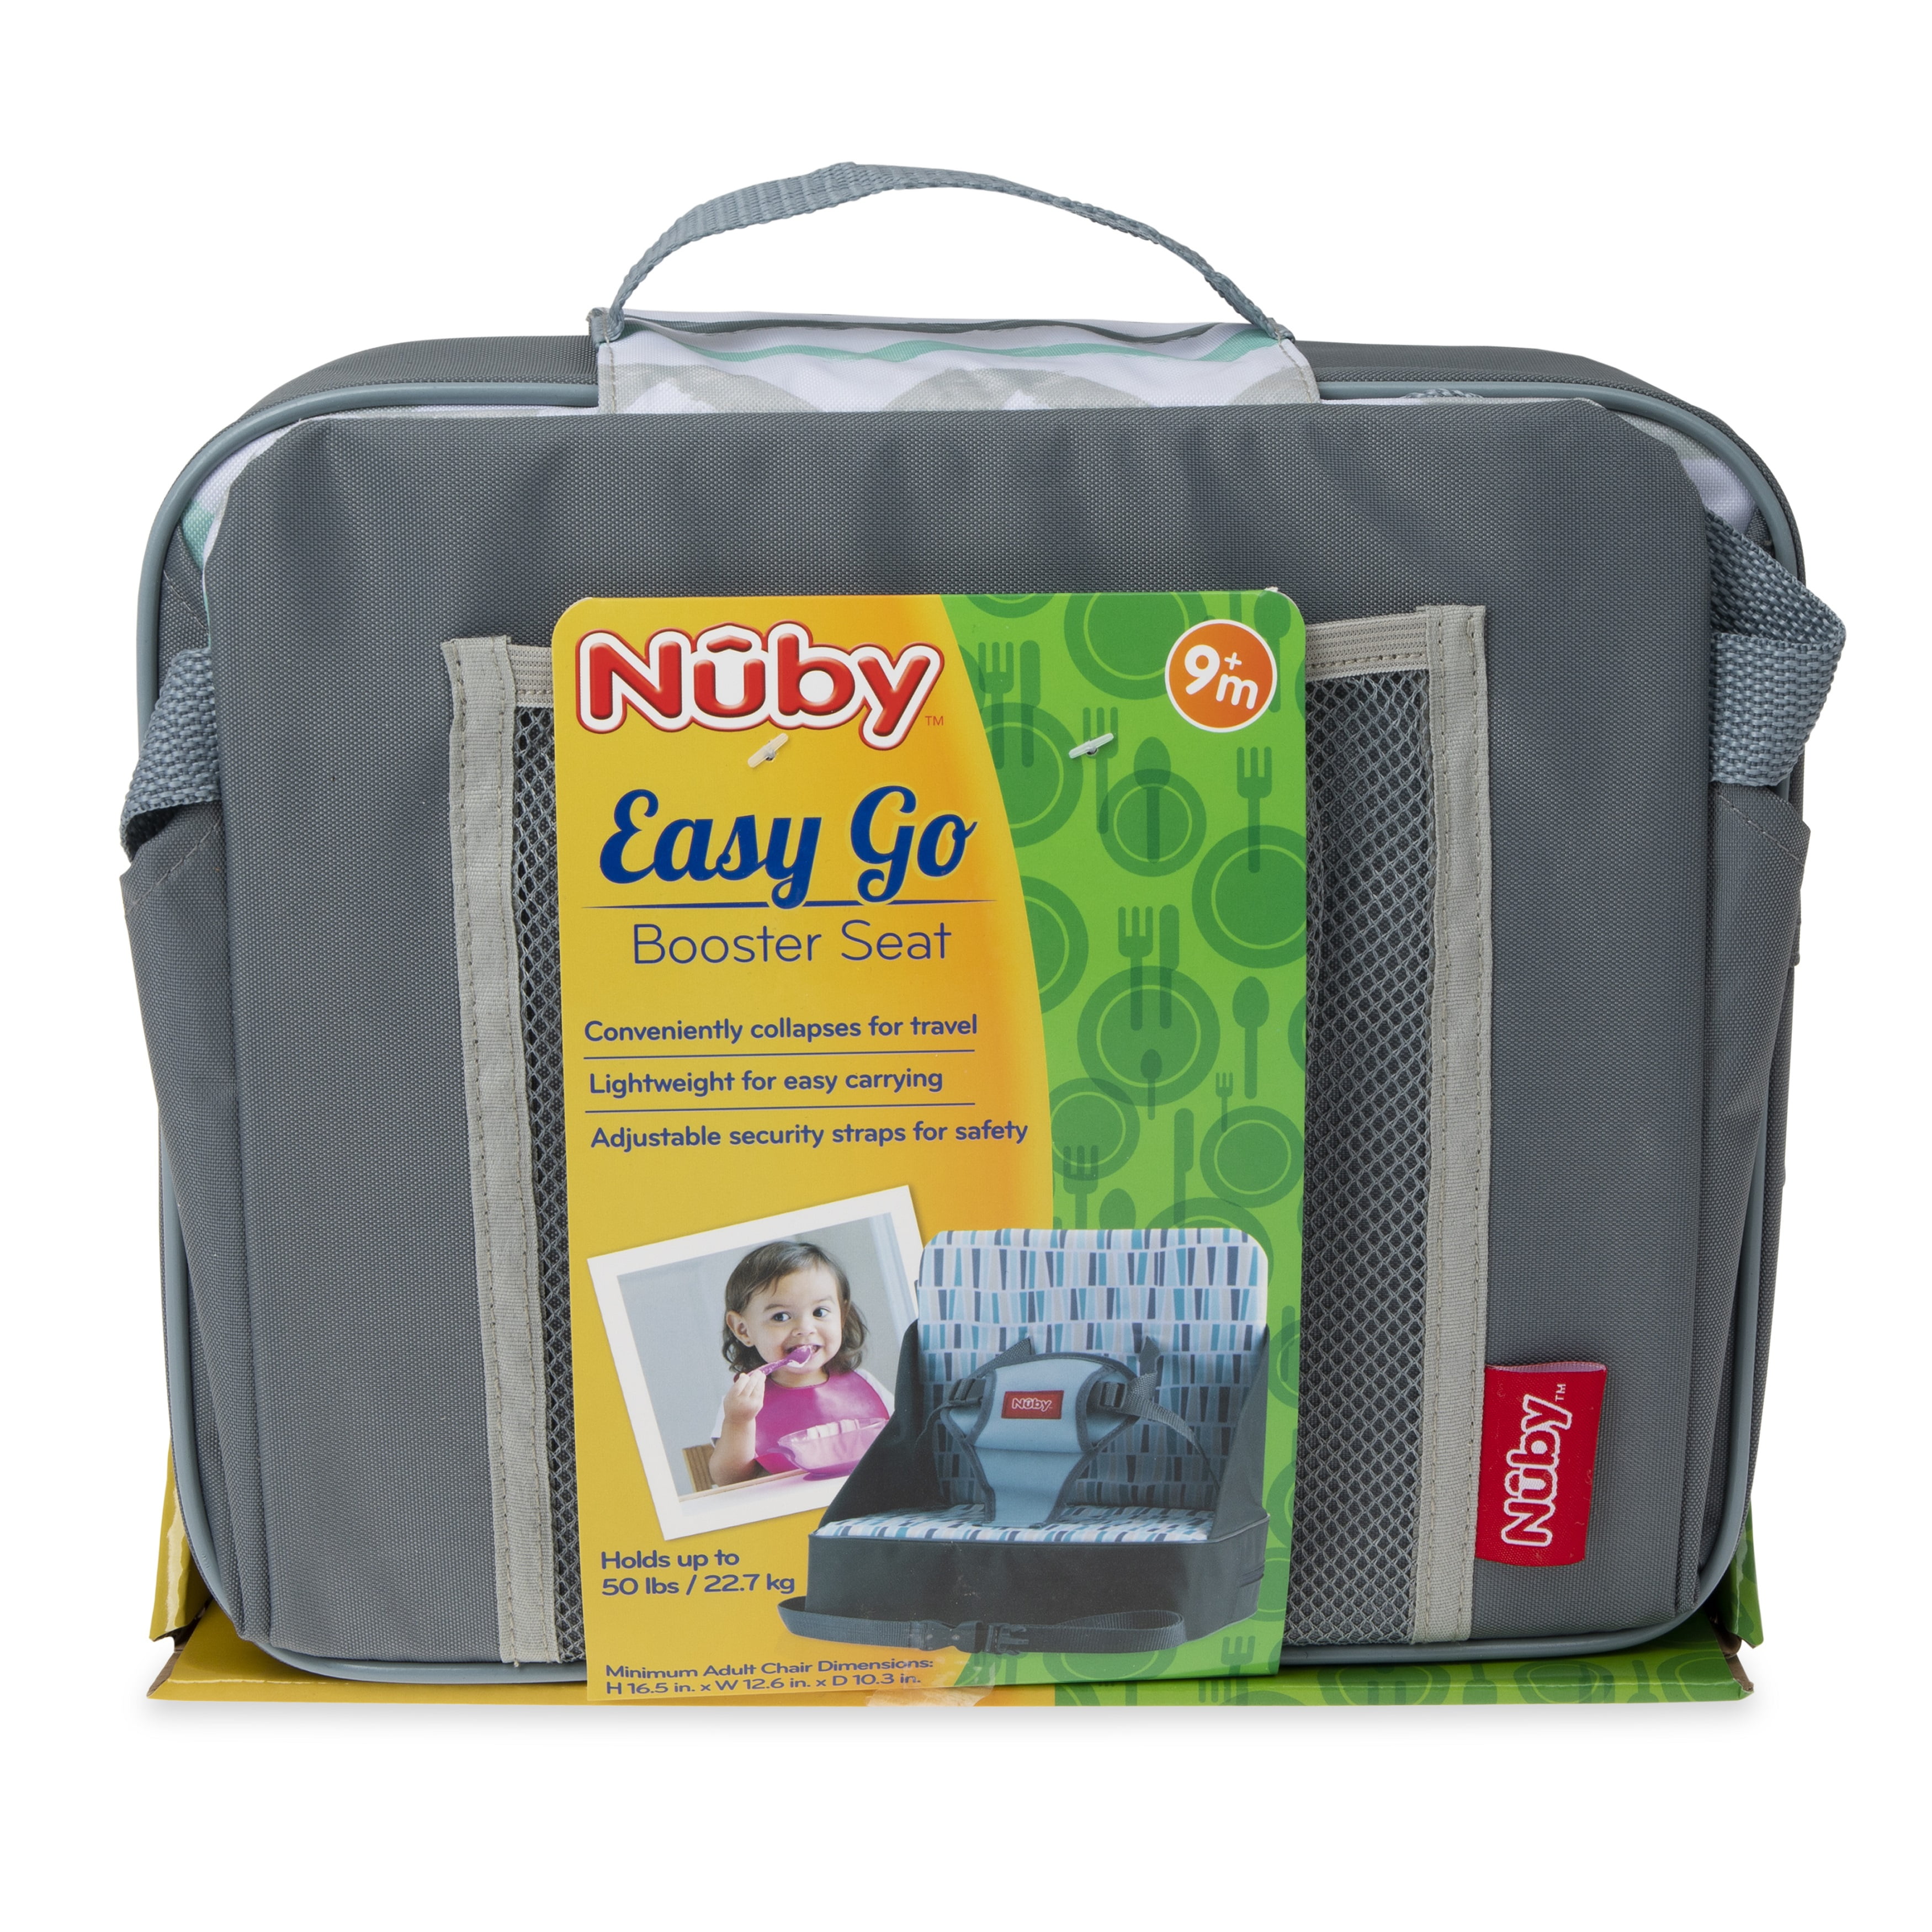 Dropship Nuby Easy Go Booster Seat With Adjustable Safety Straps And  Harness, Gray , Unisex to Sell Online at a Lower Price